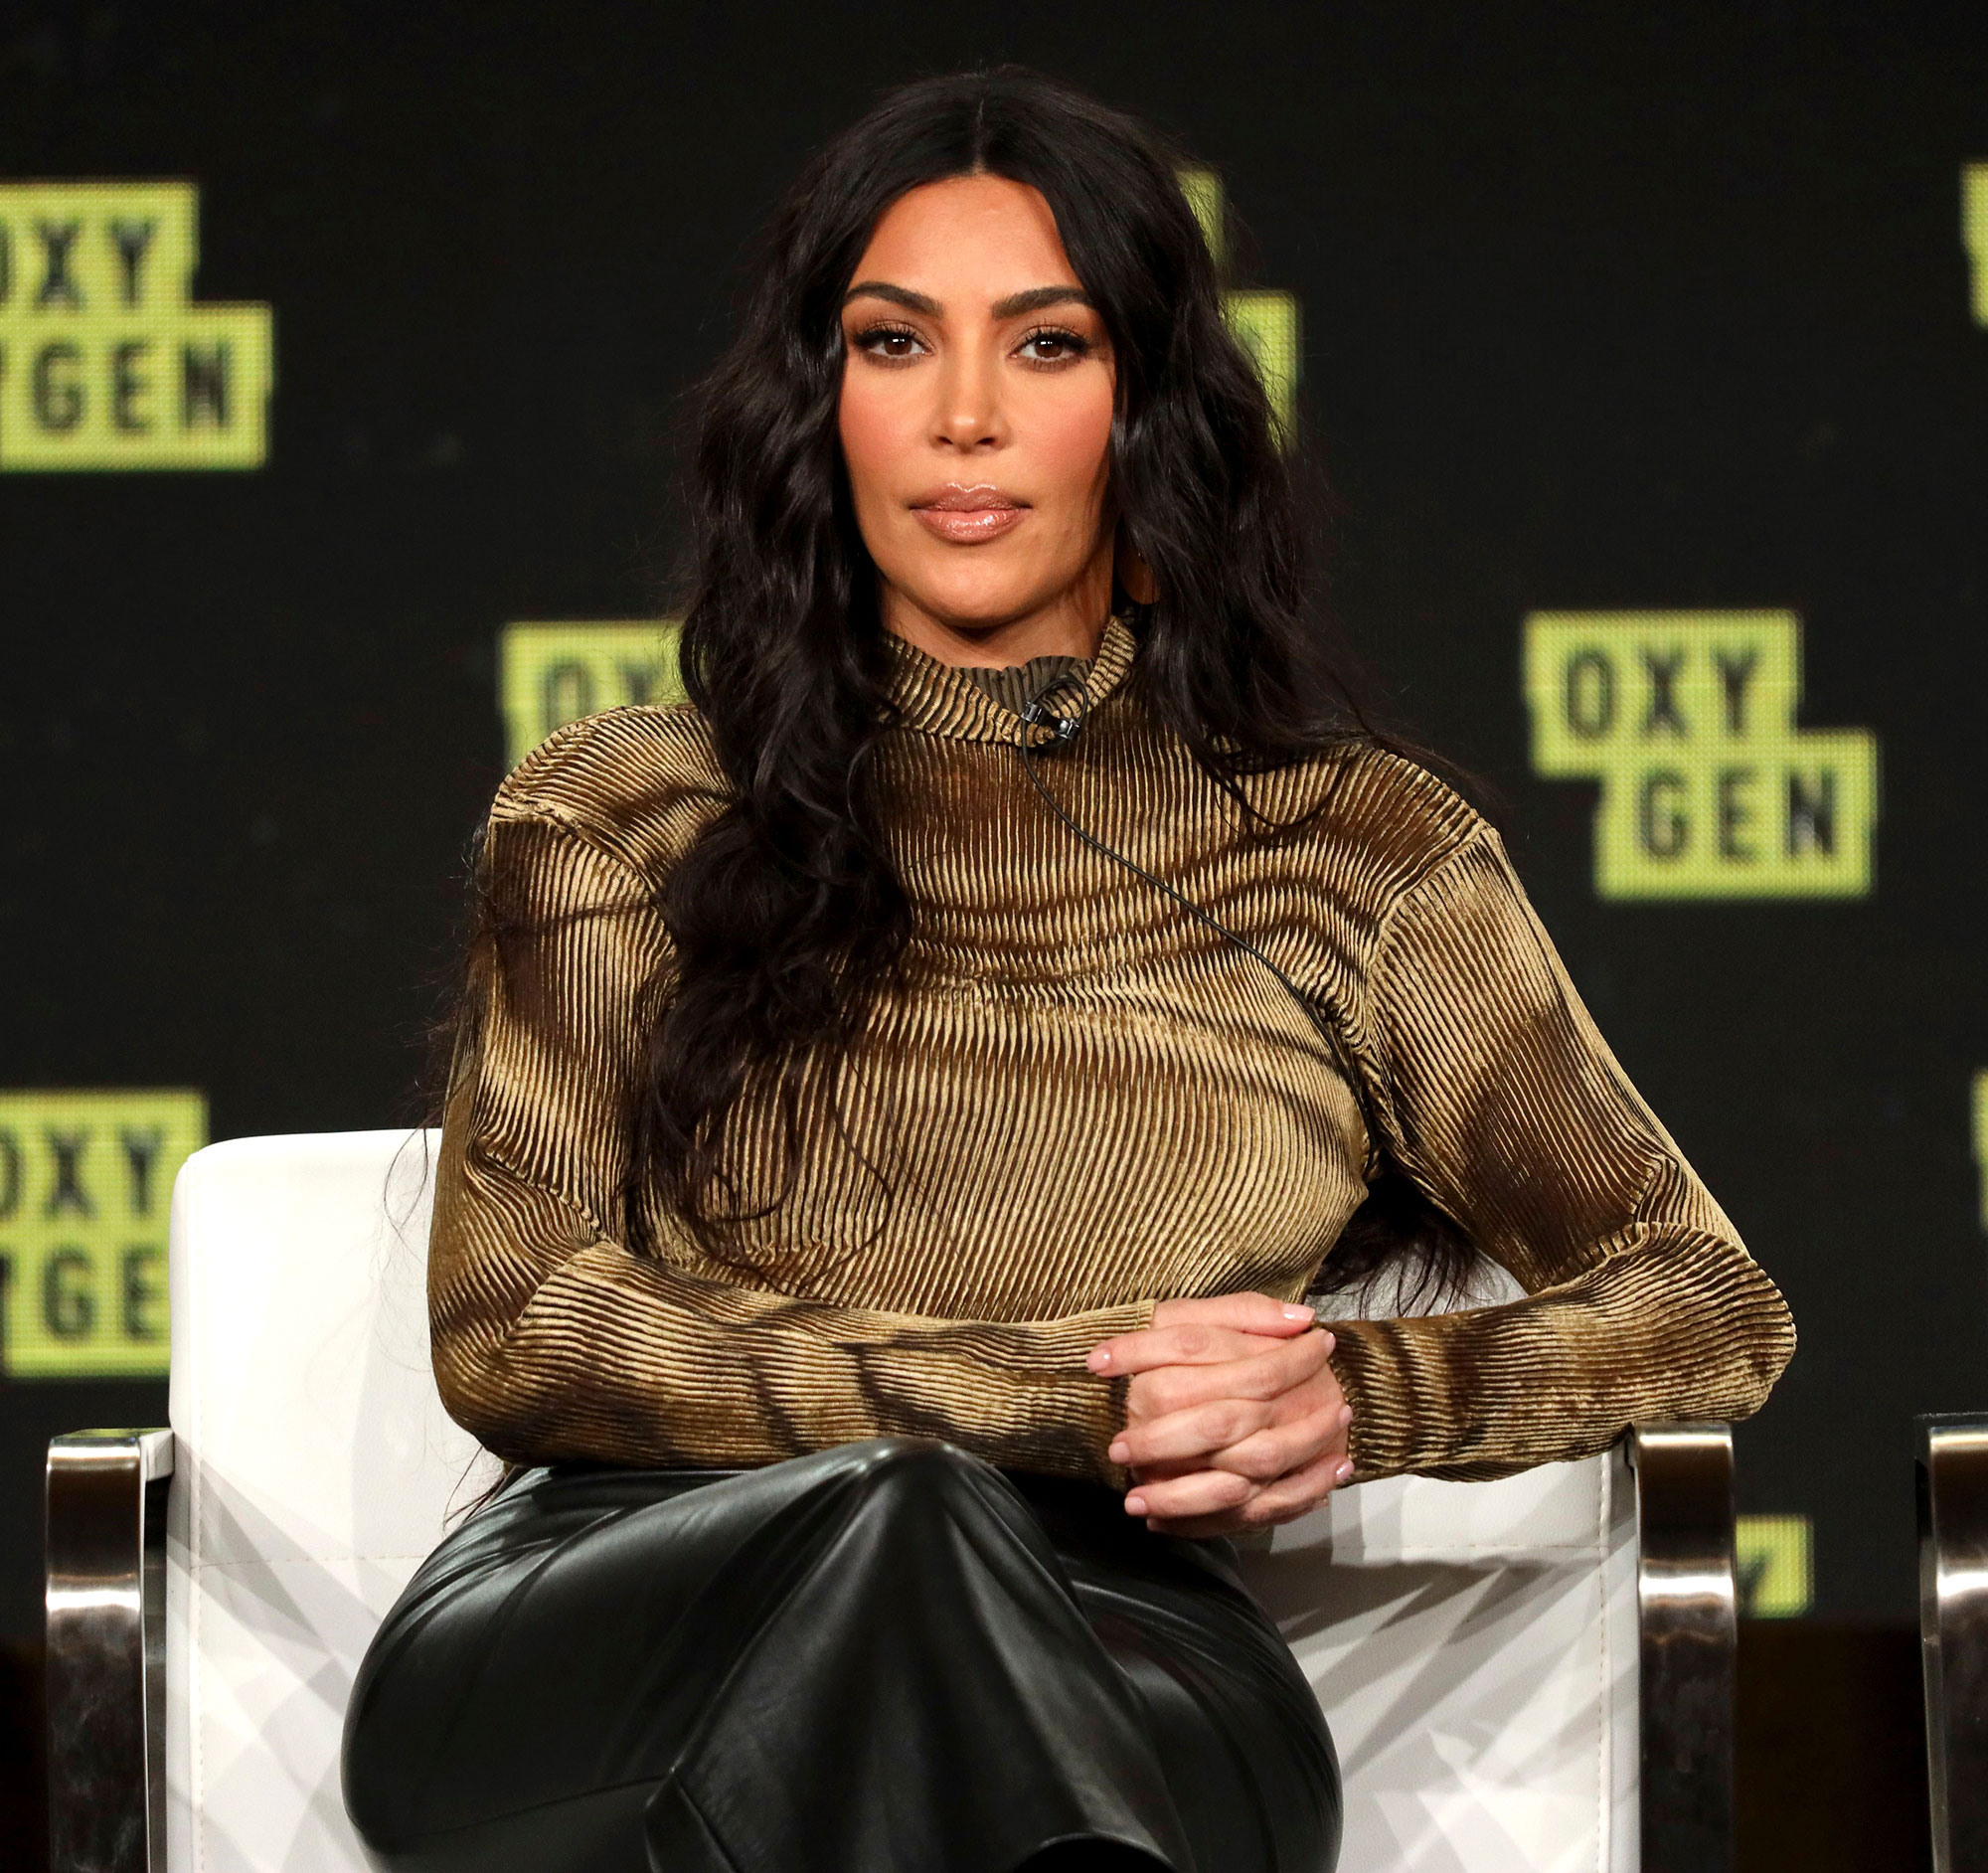 Kim Kardashian West on Justice Project, law school: Not for publicity